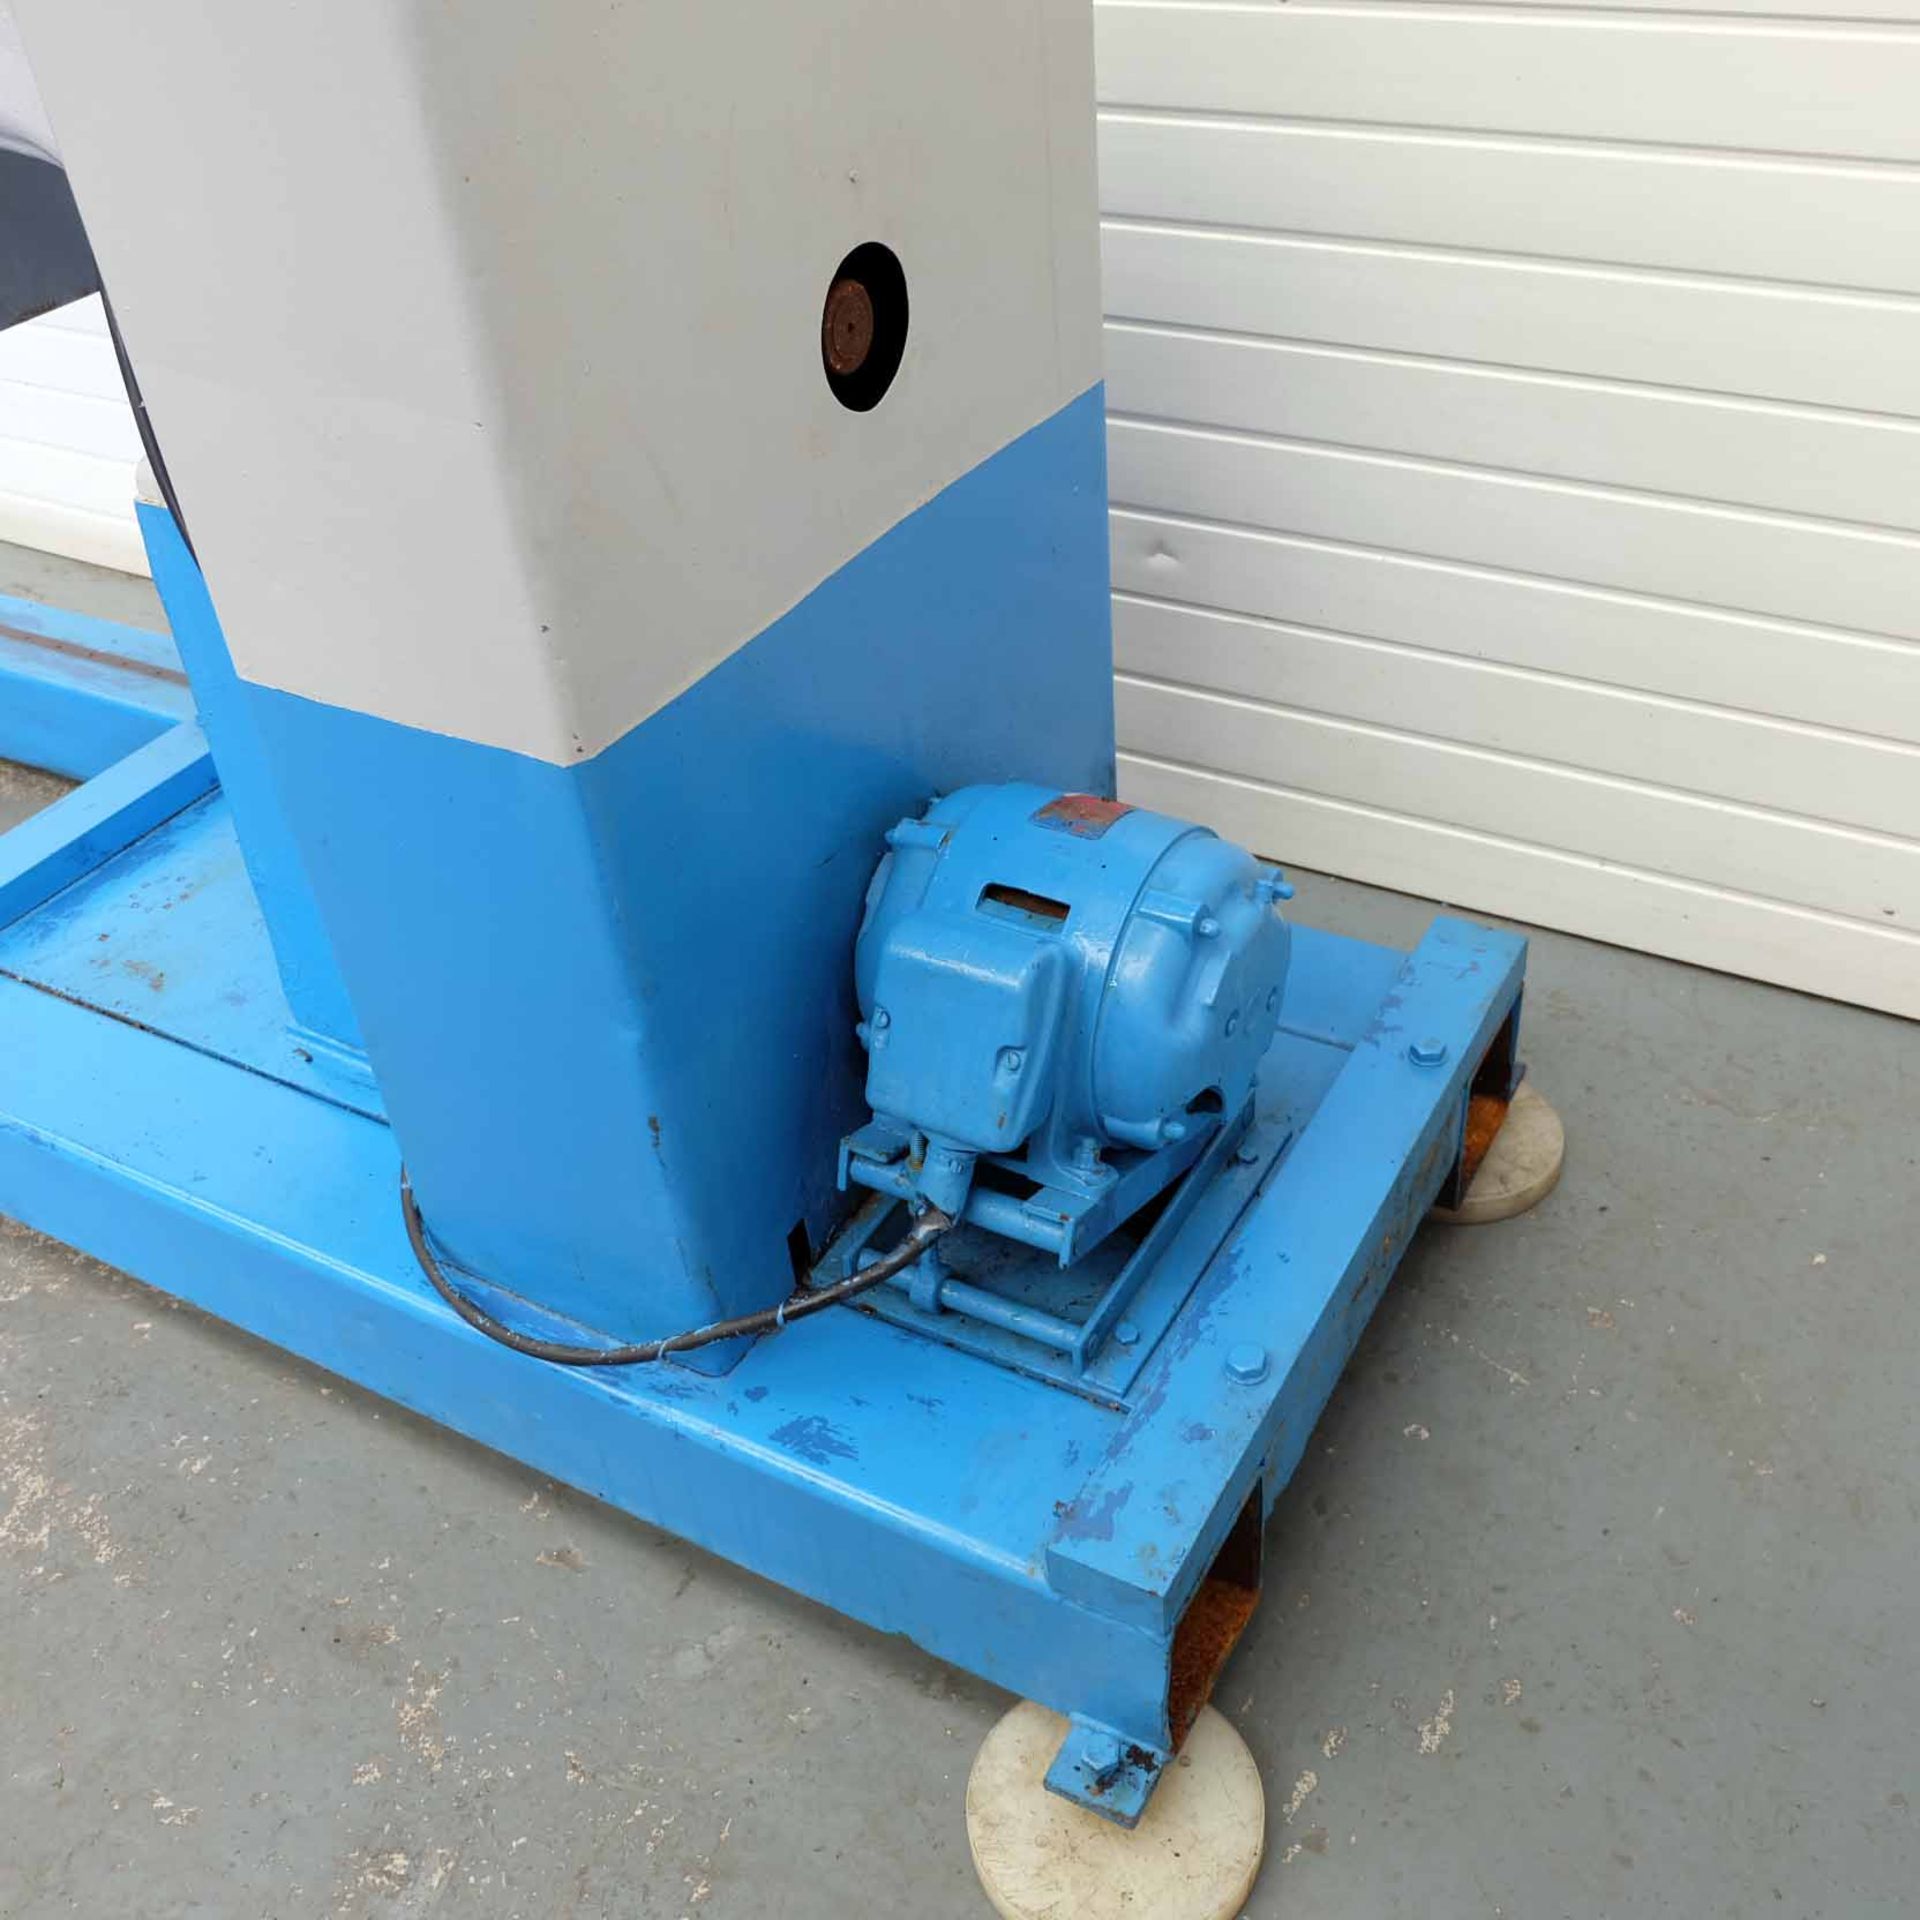 Frost Swaging Machine. Throat Depth 36" Approx. With Tailstock. Motor 3 Phase, 1 HP. - Image 9 of 10